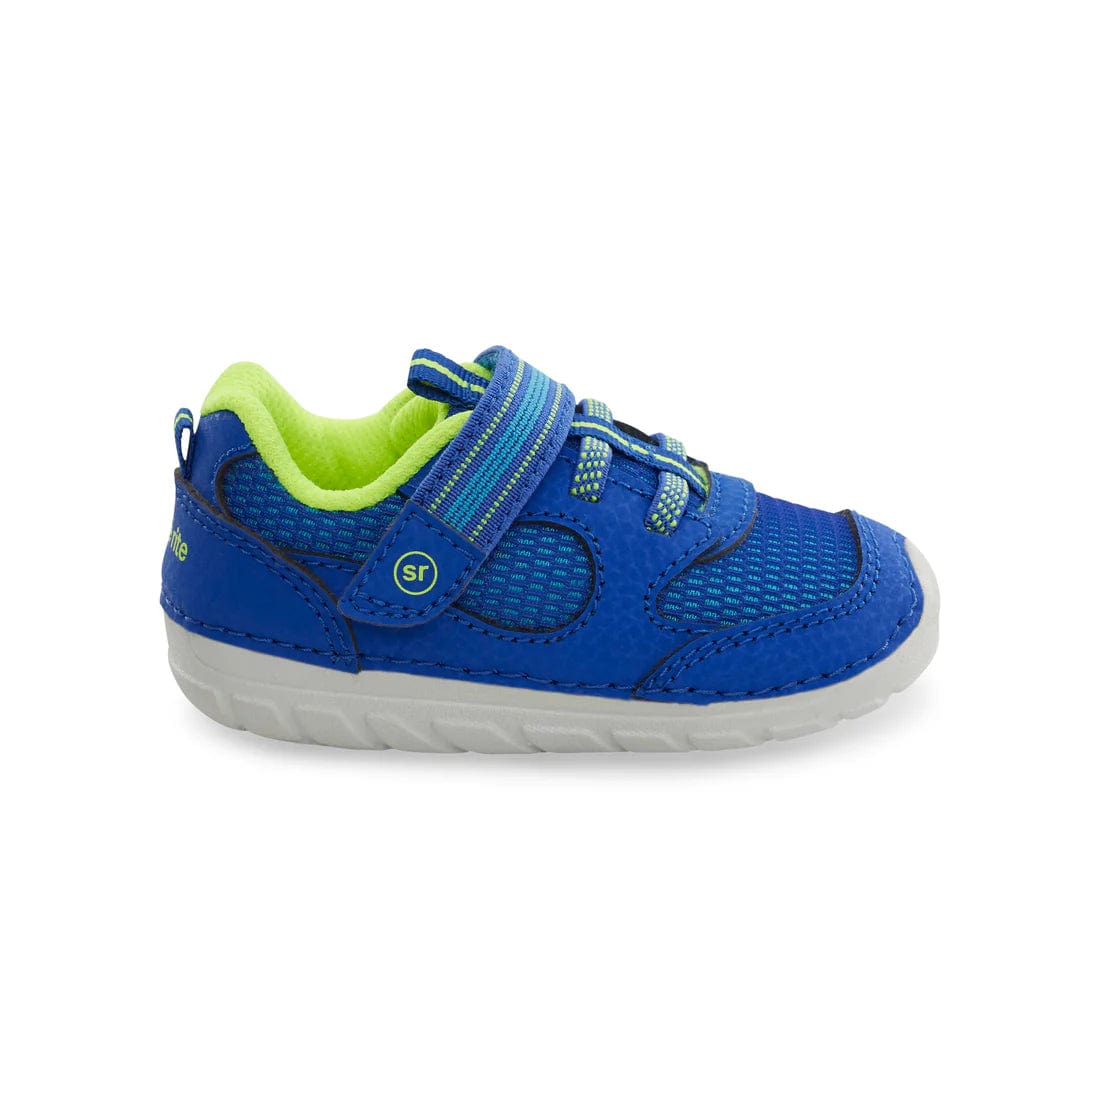 Stride Rite First Step Shoes Stride Rite Turbo - Bright blue